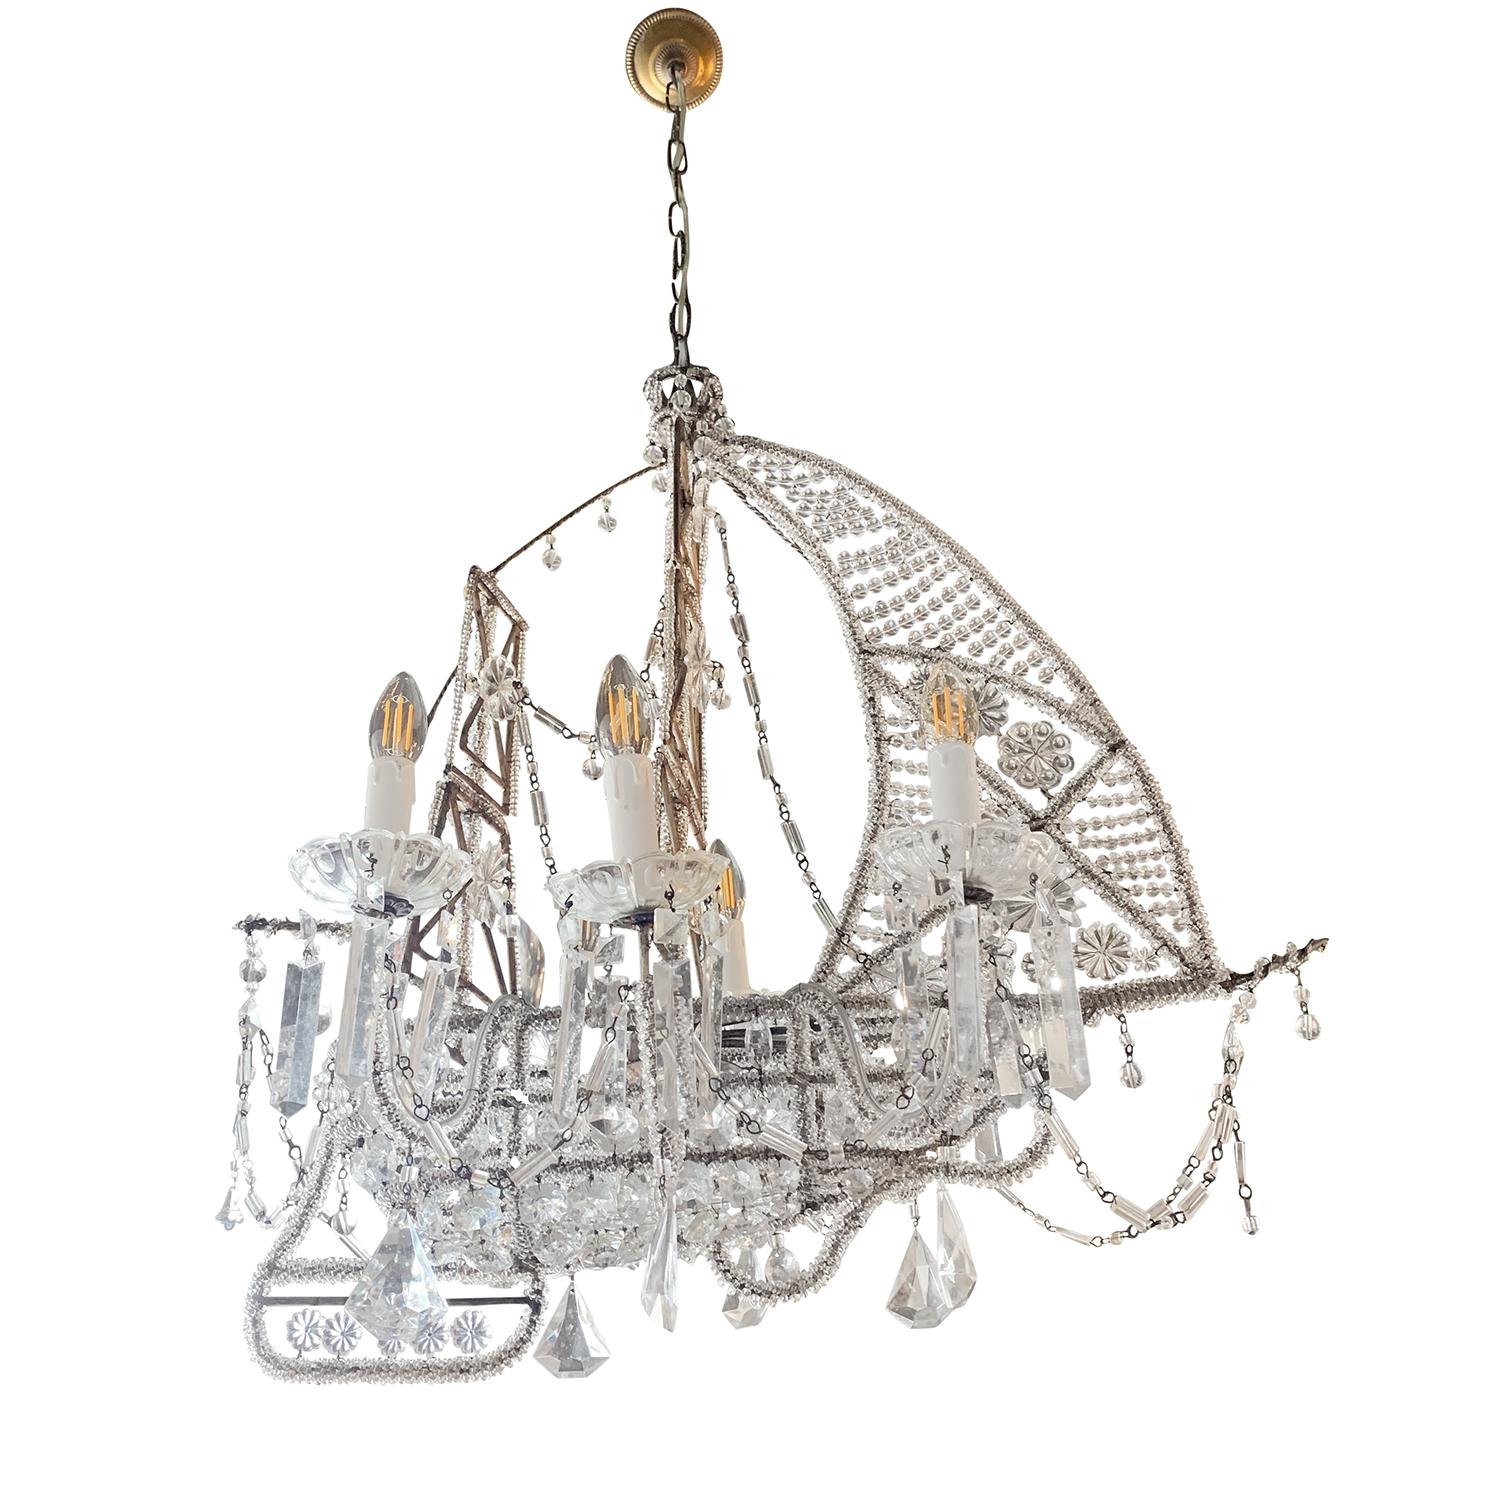 This French Art Deco chandelier is in the shape of a ship with wrapped crystal beads and studded in crystal flowers. The vintage pendant is in good condition. It holds six-light with long crystals draped from each arm. Wear consistent with age and